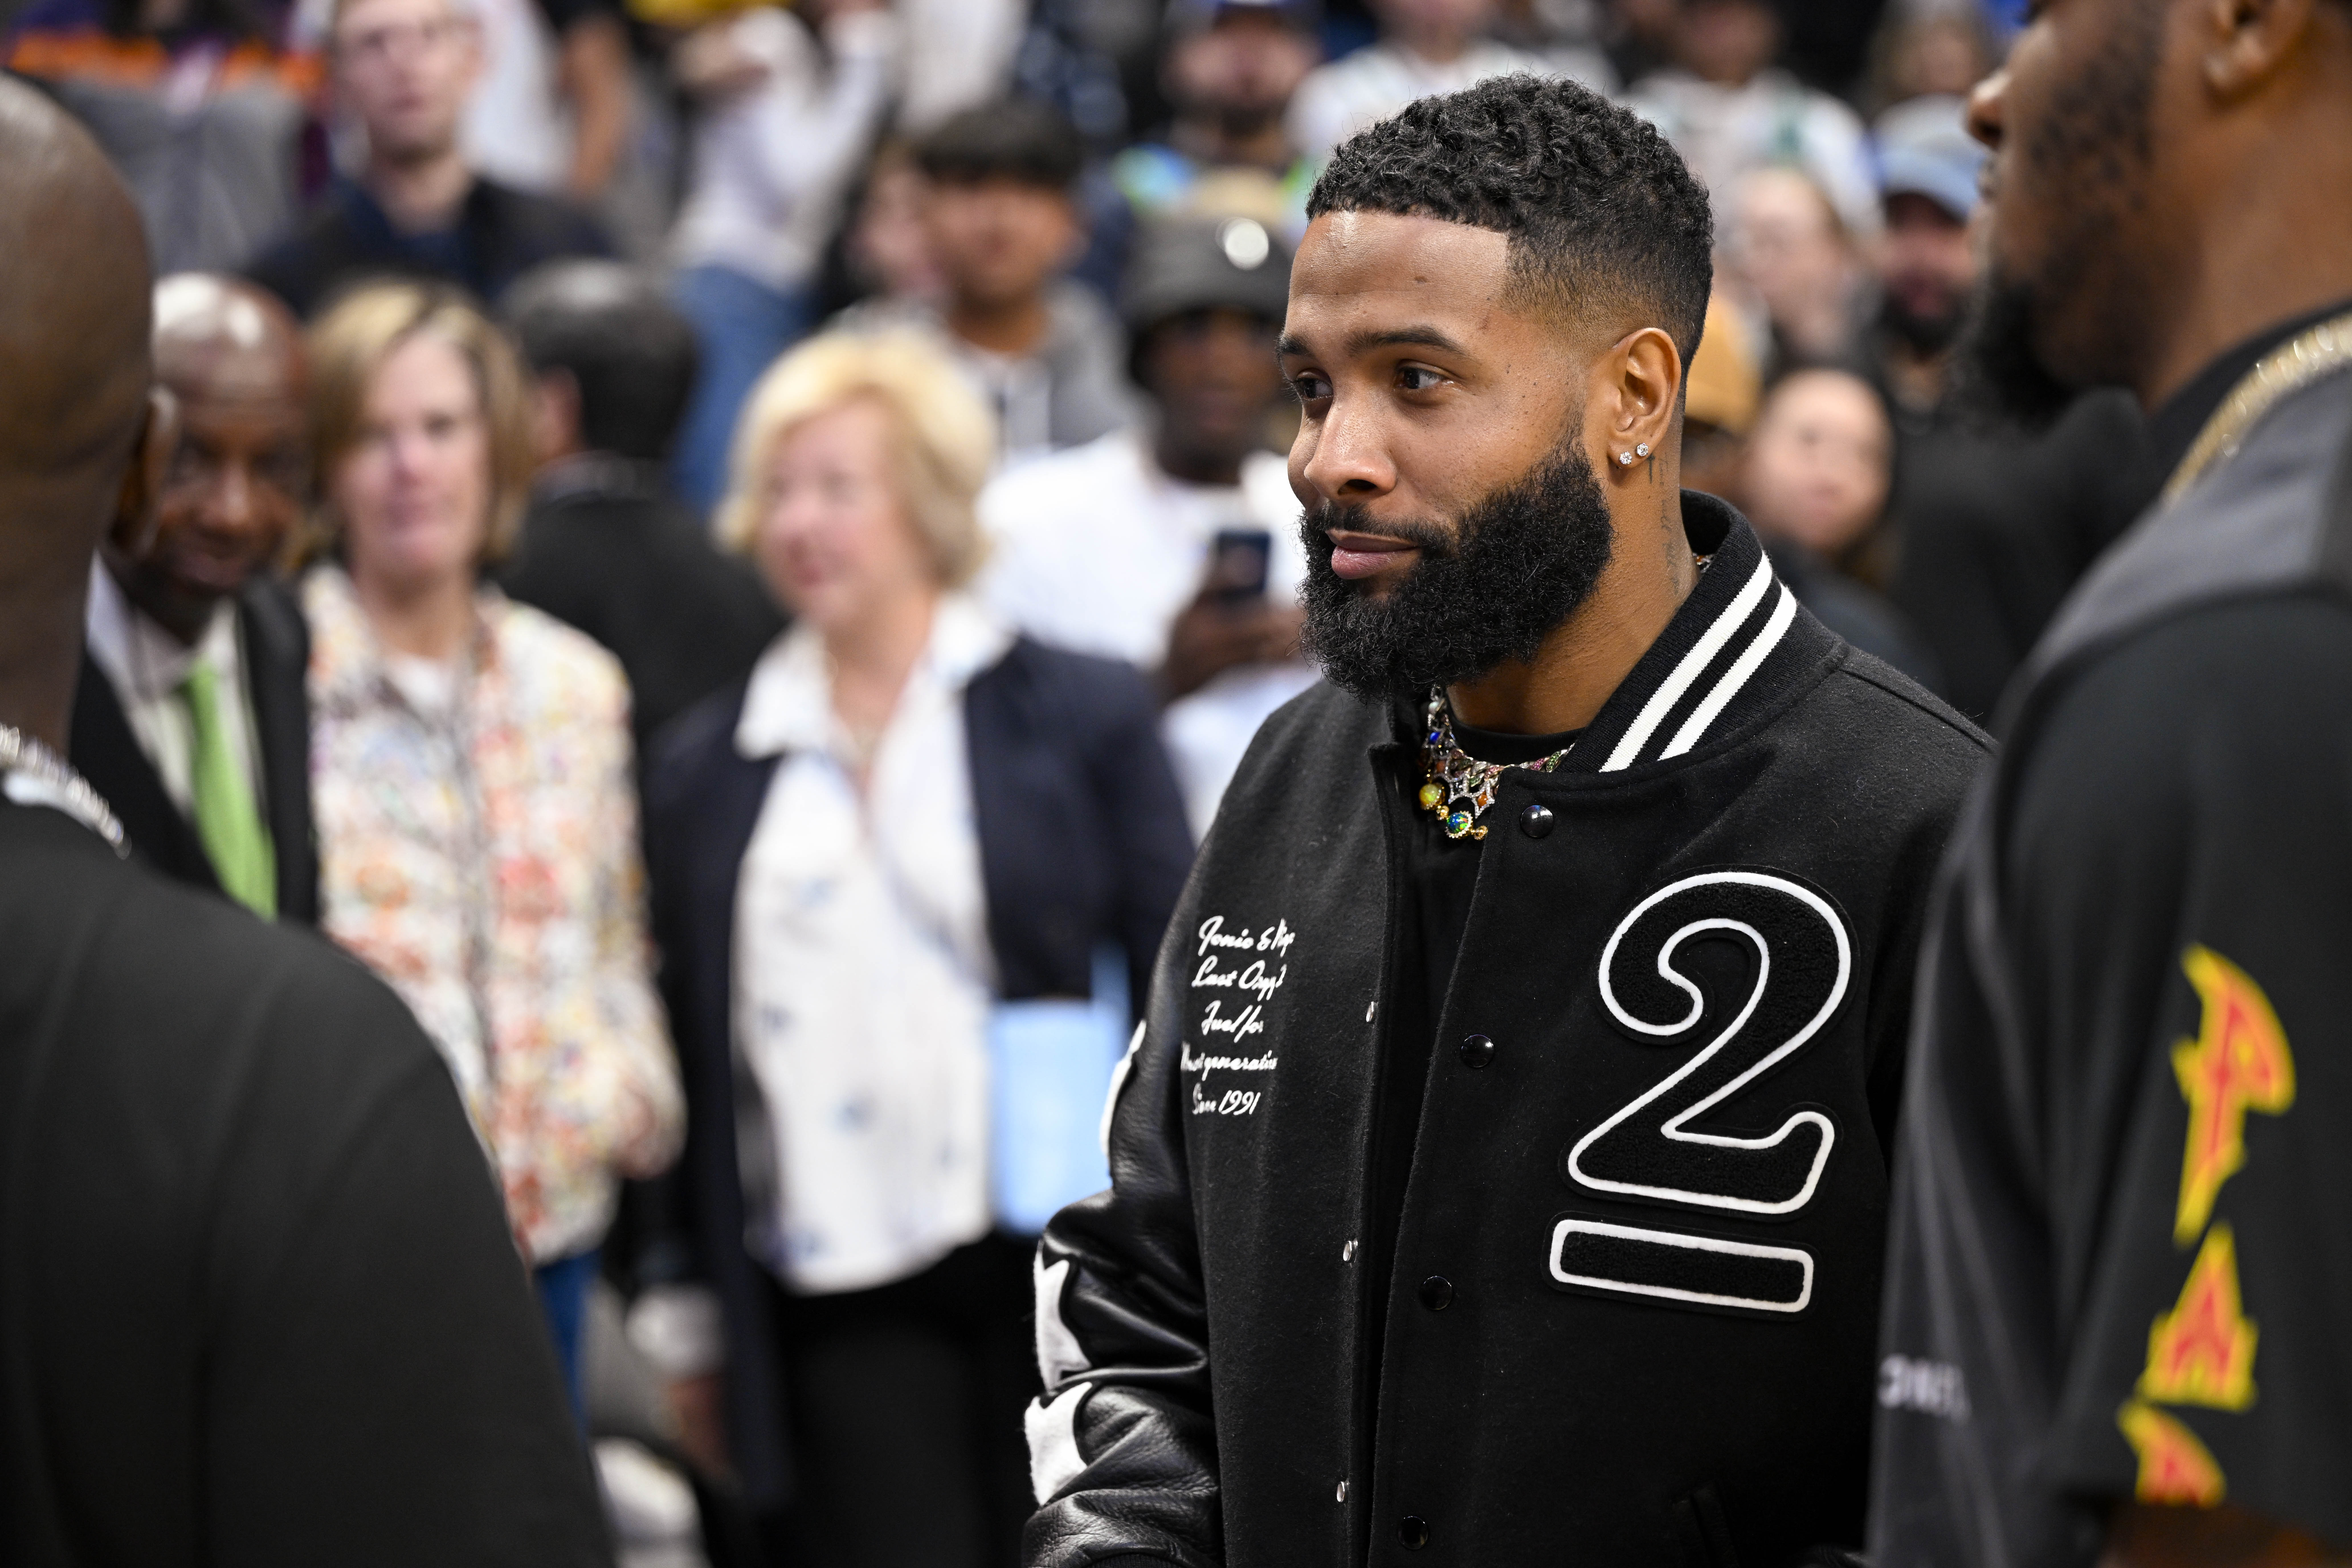 Odell Beckham’s Jr.’s ongoing free agency saga could reportedly end with the Jets